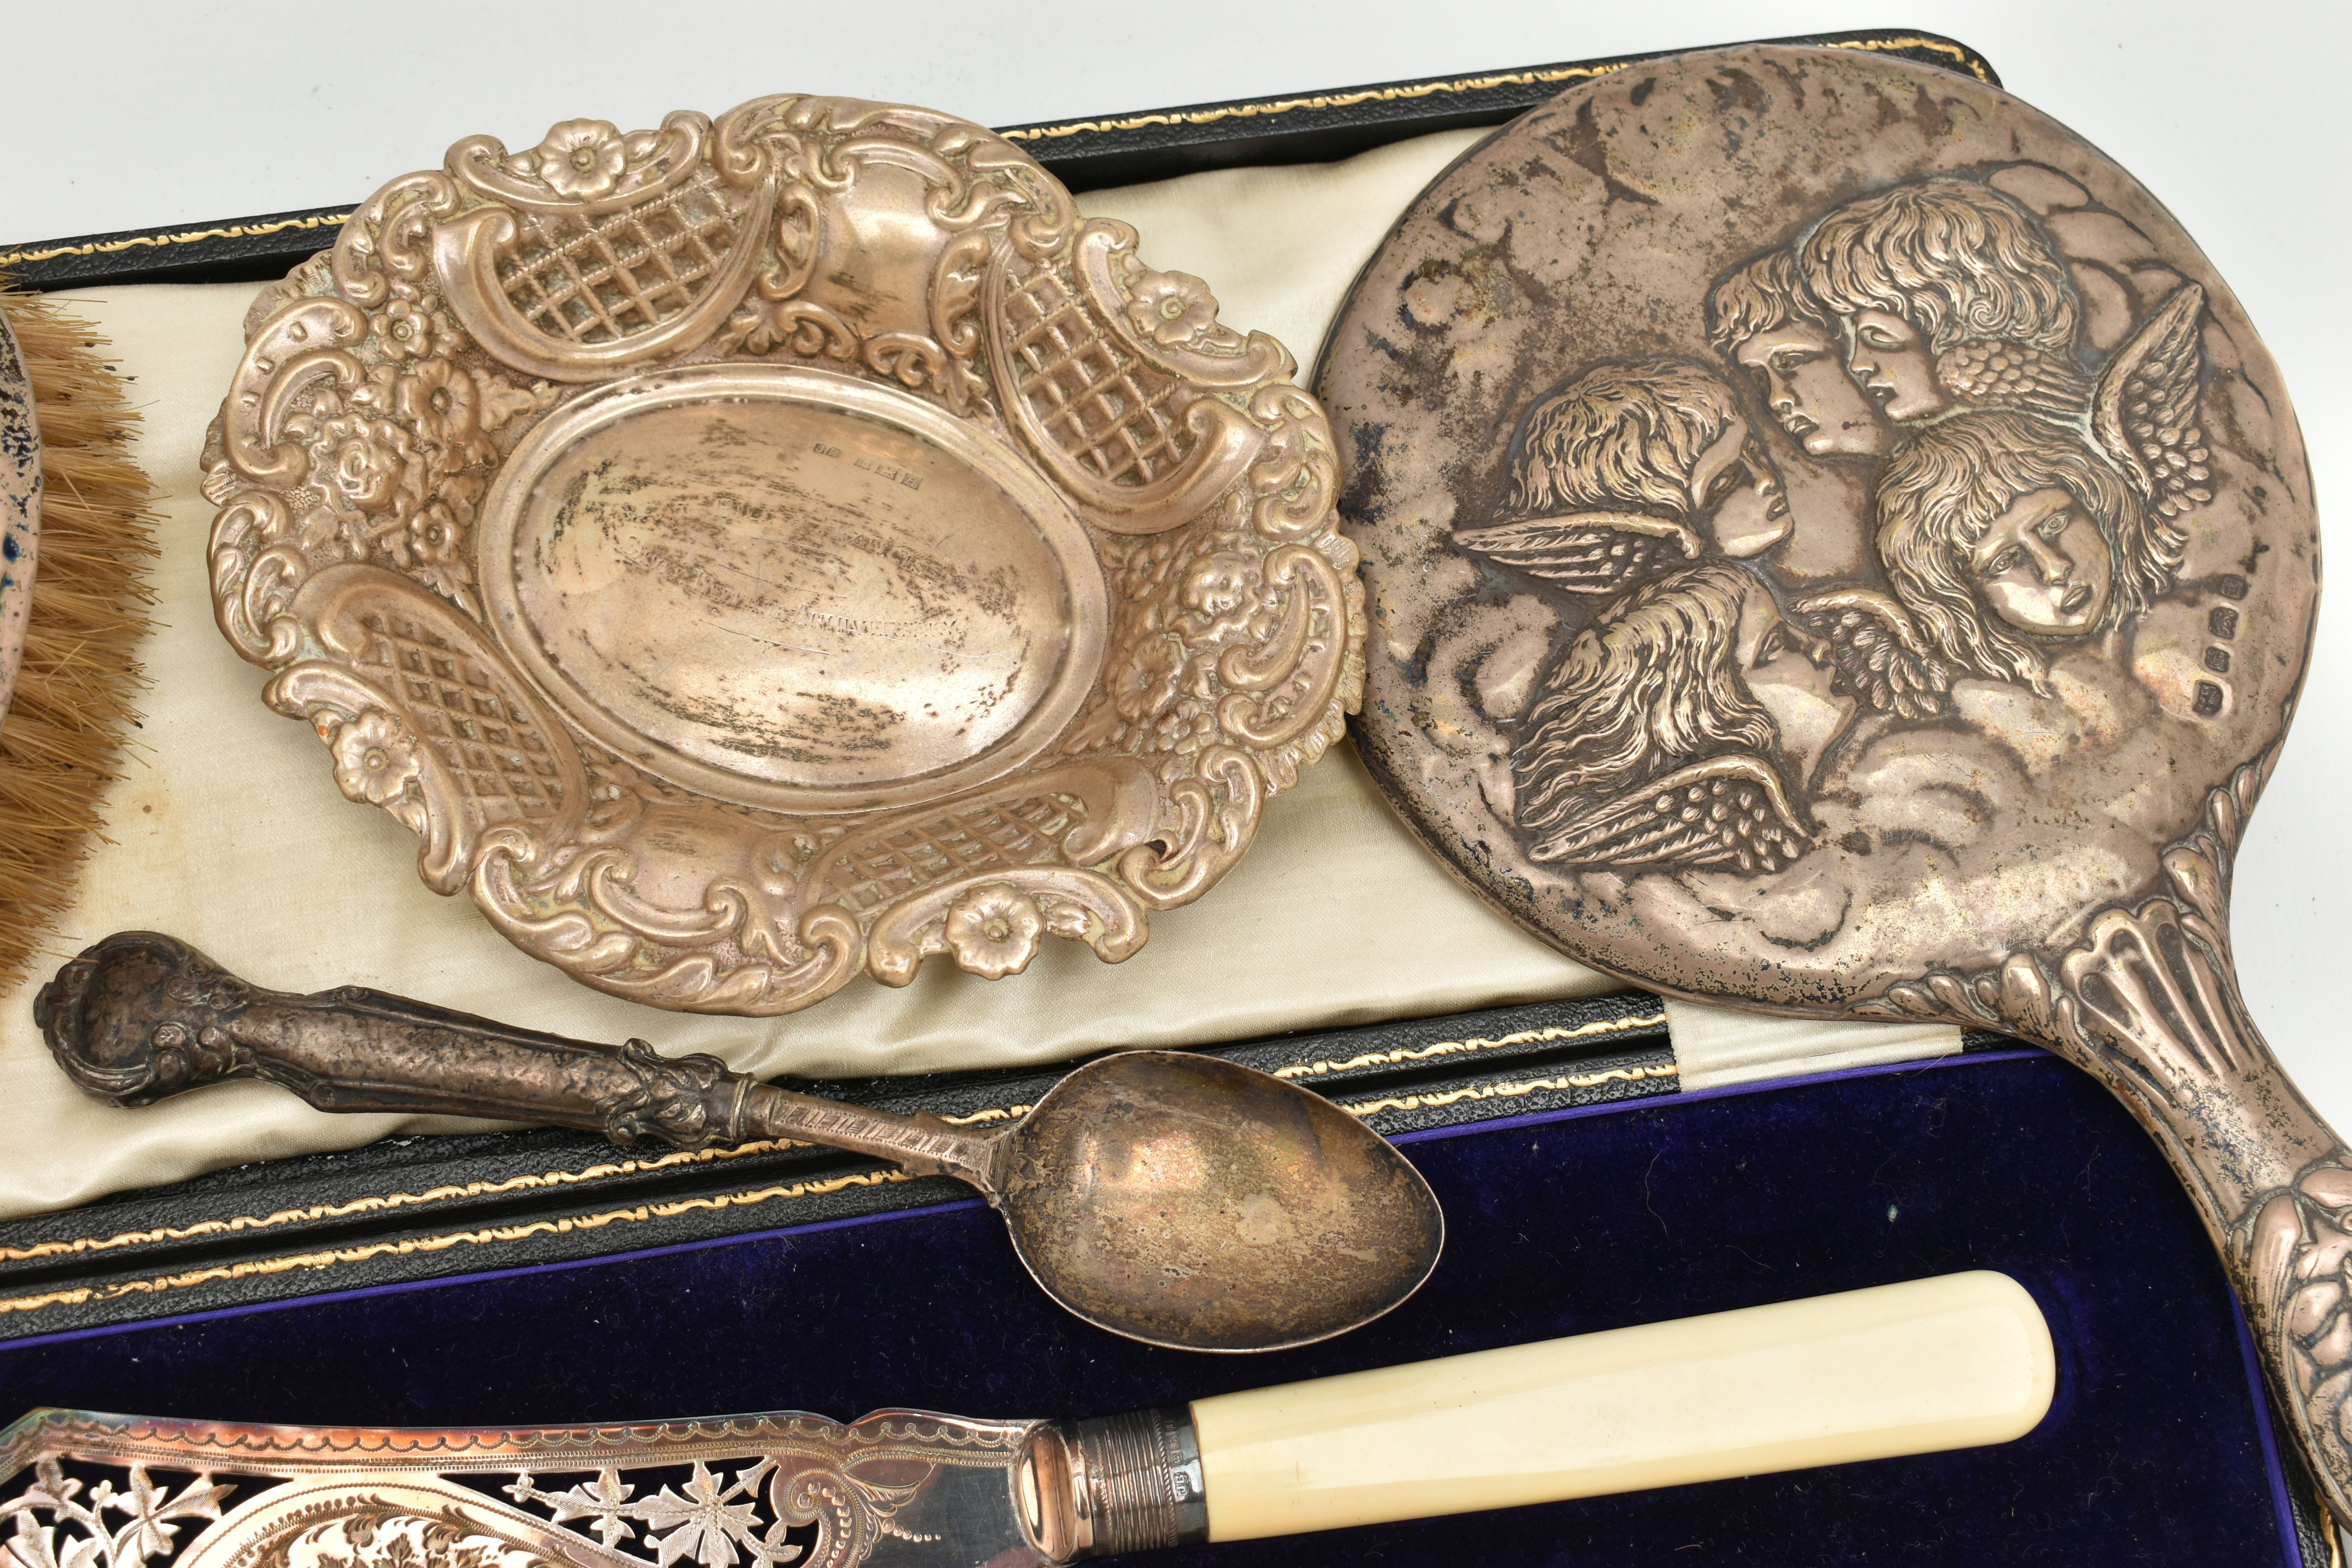 SILVER VANITY PIECES, BONBON DISH AND OTHER ITEMS, to include two AF vanity pieces, hair brush and - Image 3 of 4